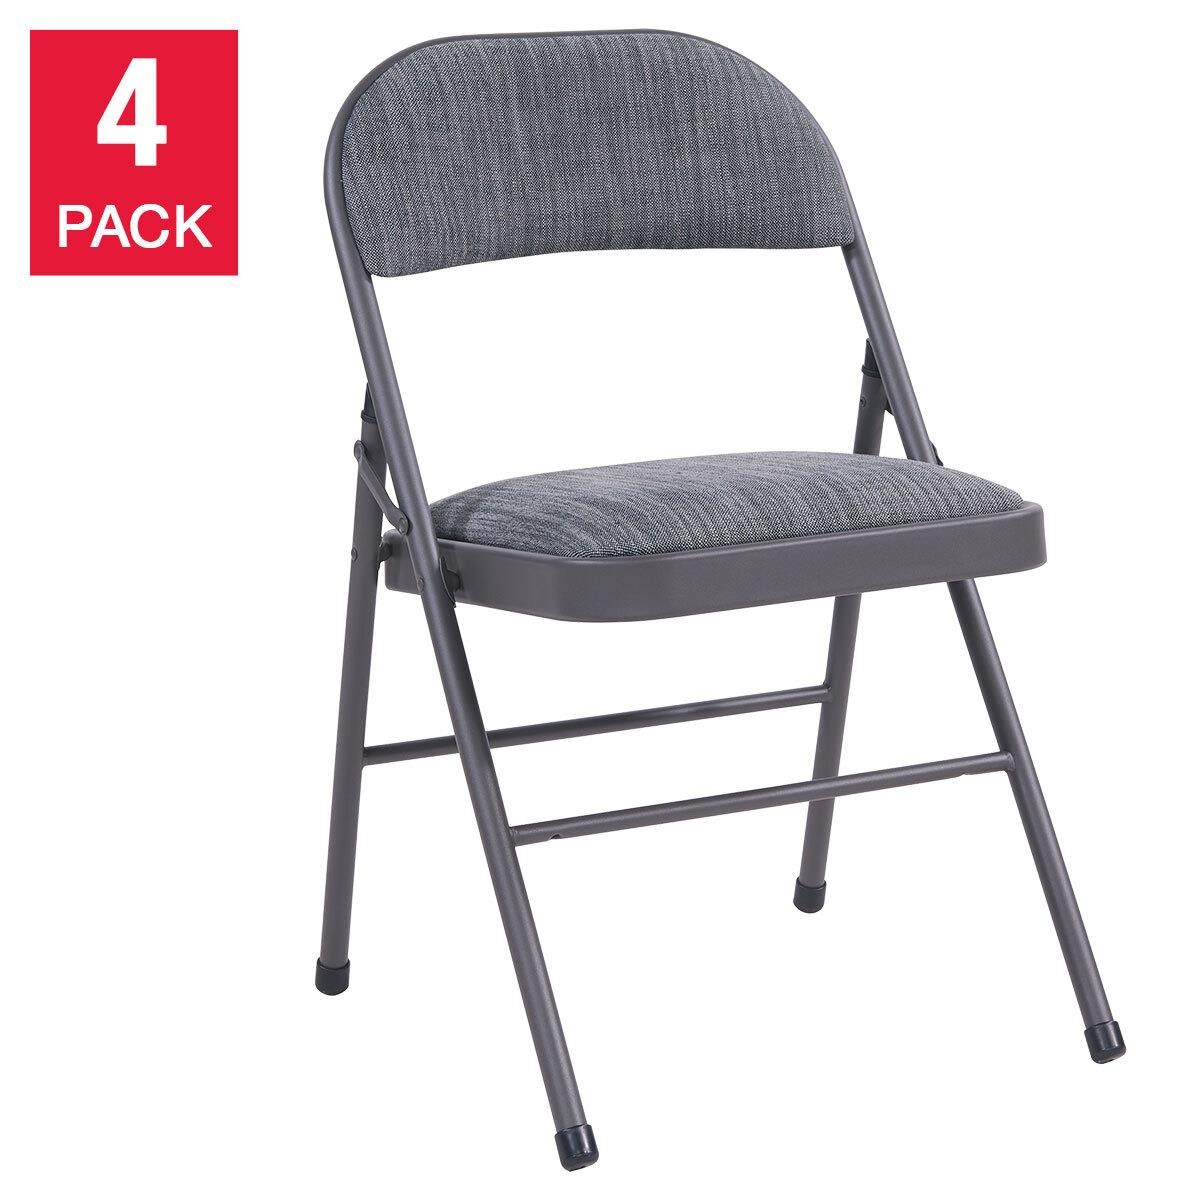 Maxchief Upholstered Folding Chair, 4-pack